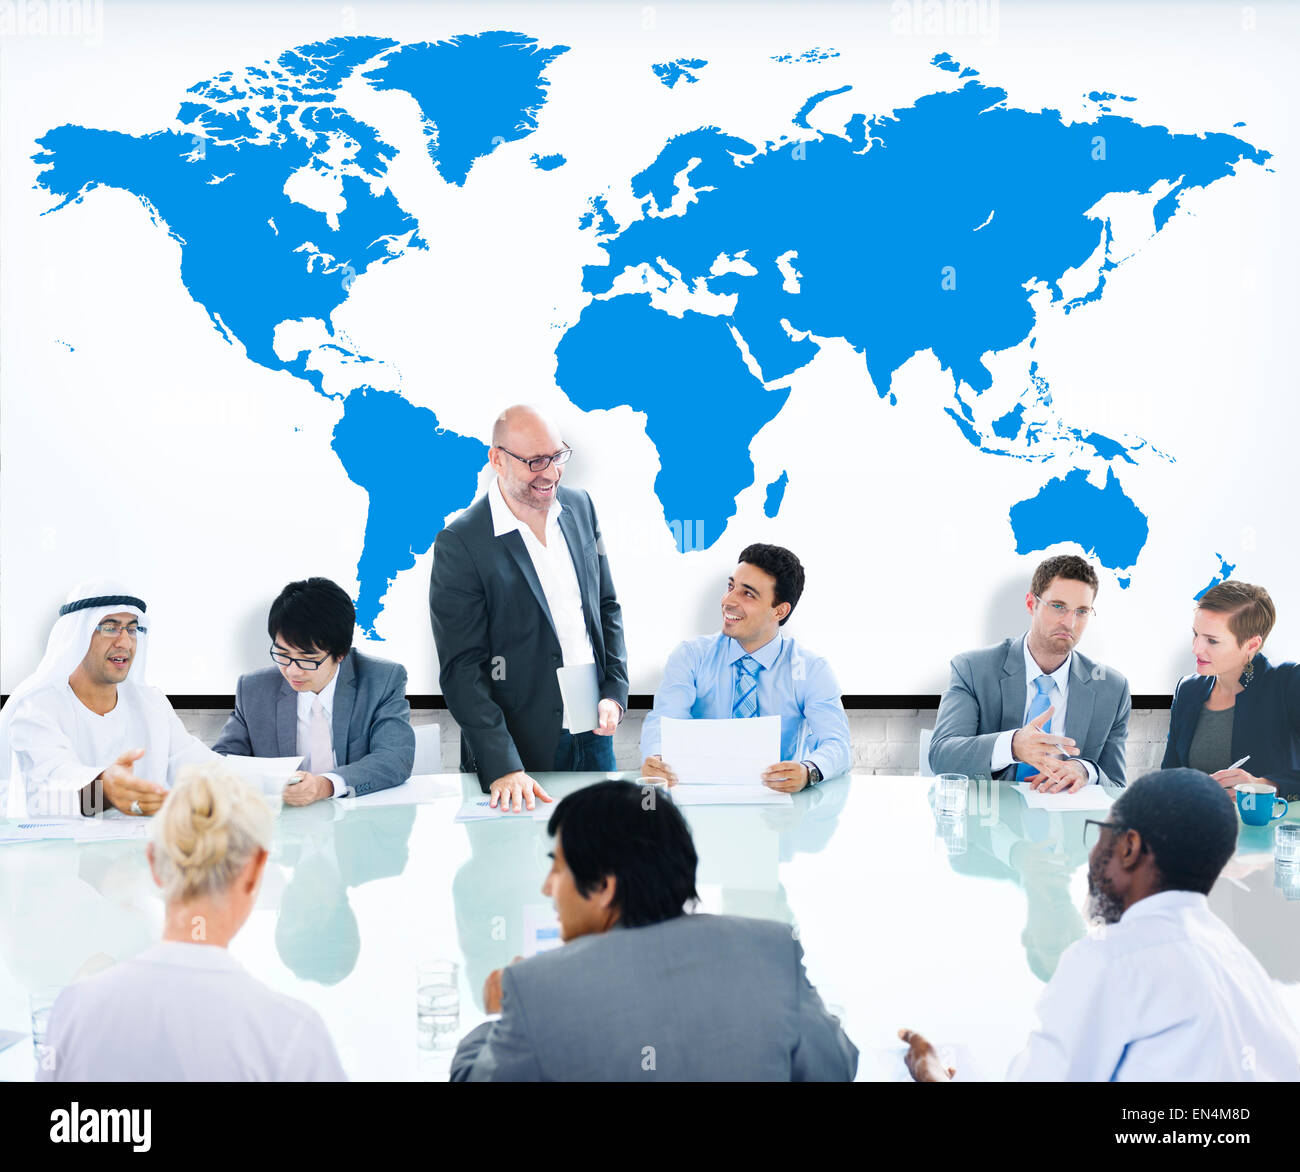 Business People Meeting Boardroom Leader World Map Concept Stock Photo